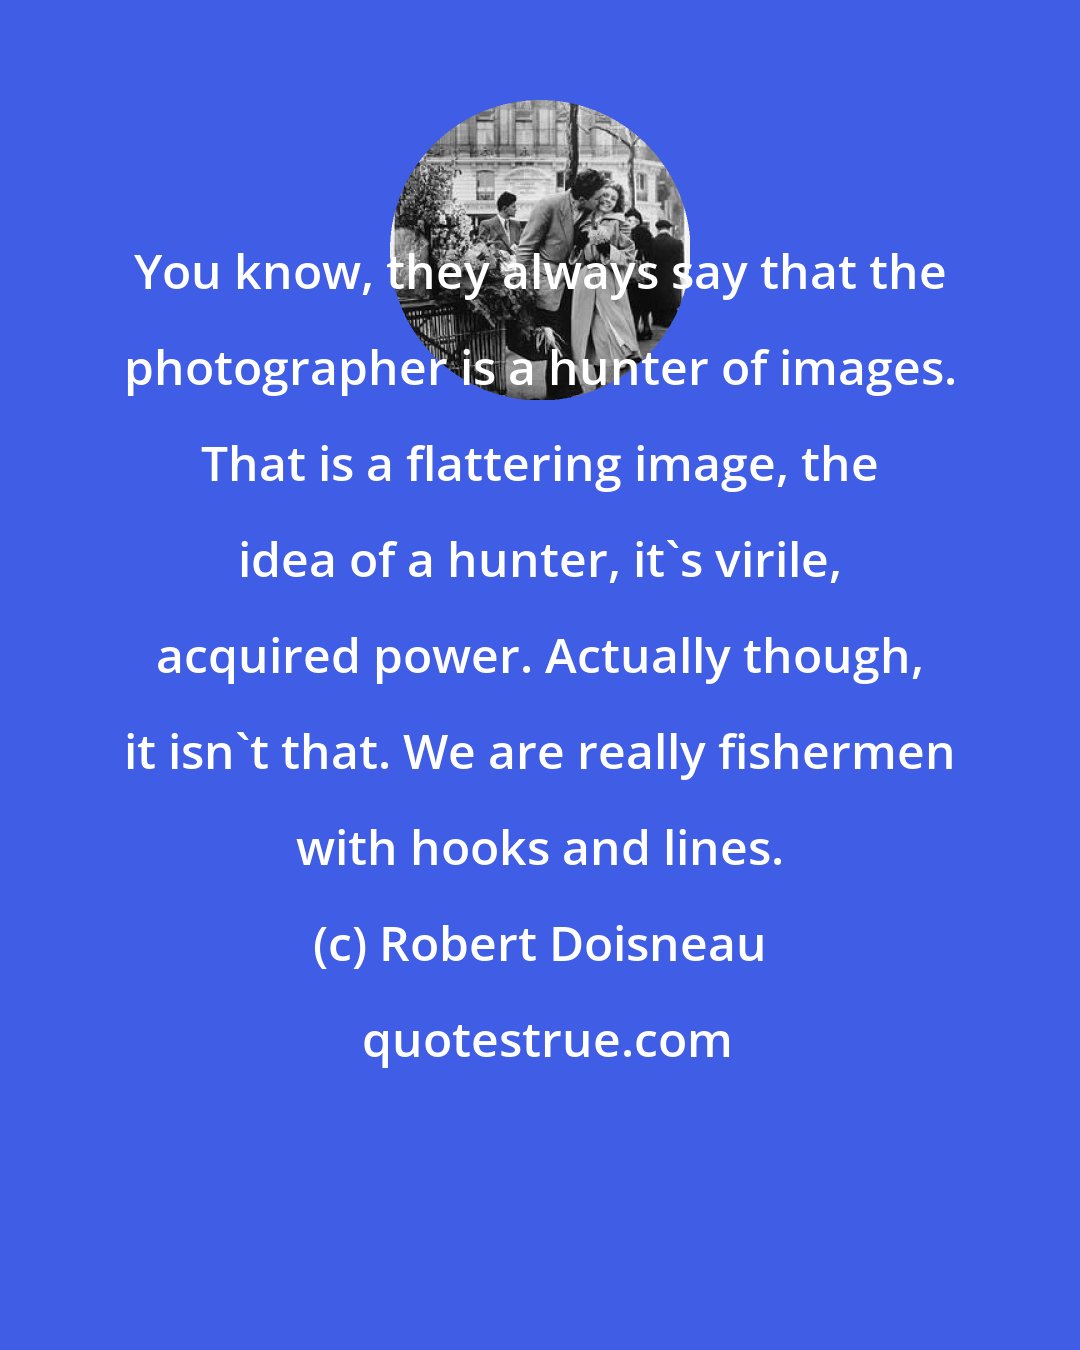 Robert Doisneau: You know, they always say that the photographer is a hunter of images. That is a flattering image, the idea of a hunter, it's virile, acquired power. Actually though, it isn't that. We are really fishermen with hooks and lines.